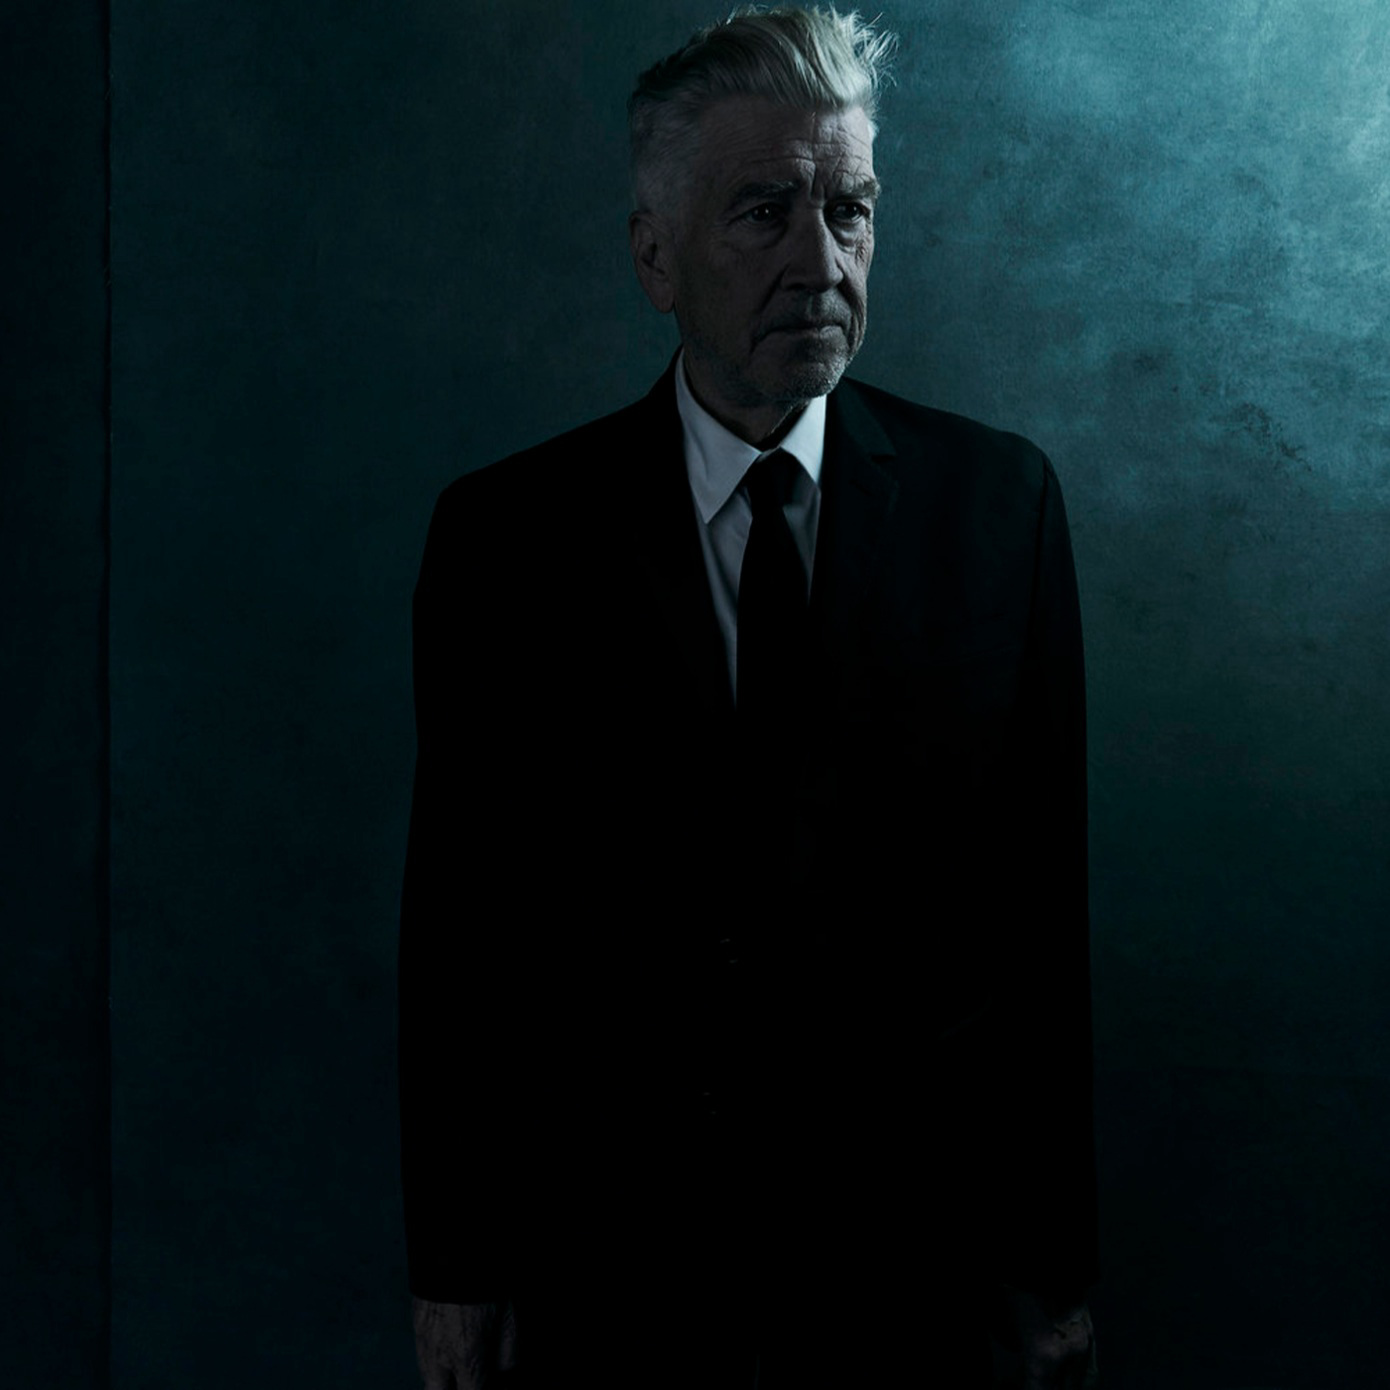 David Lynch photographed in a dark room.